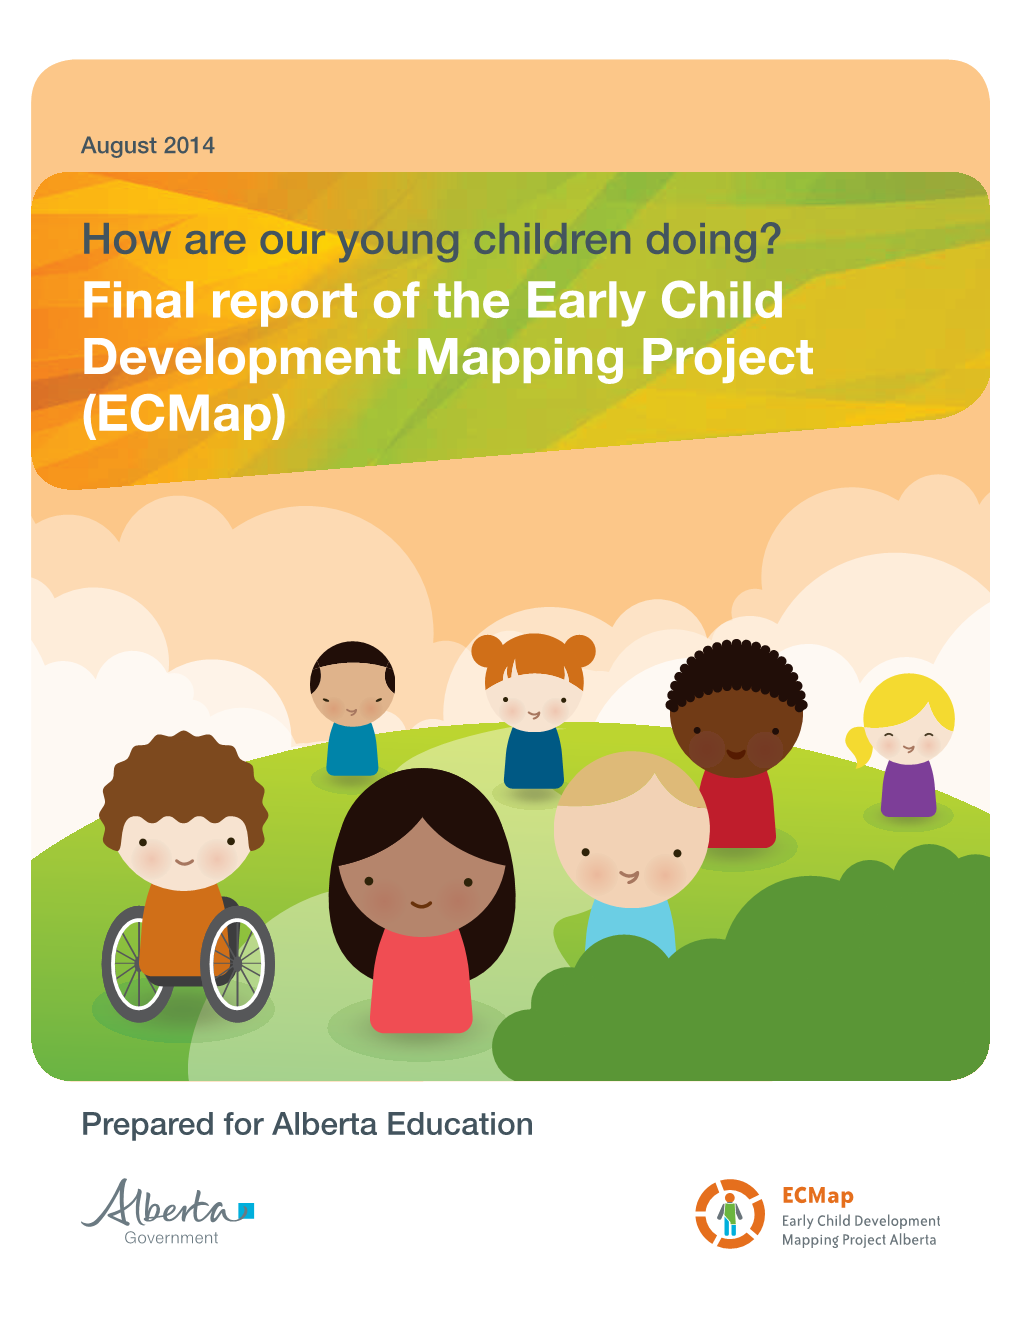 Final Report of the Early Child Development Mapping Project (Ecmap)